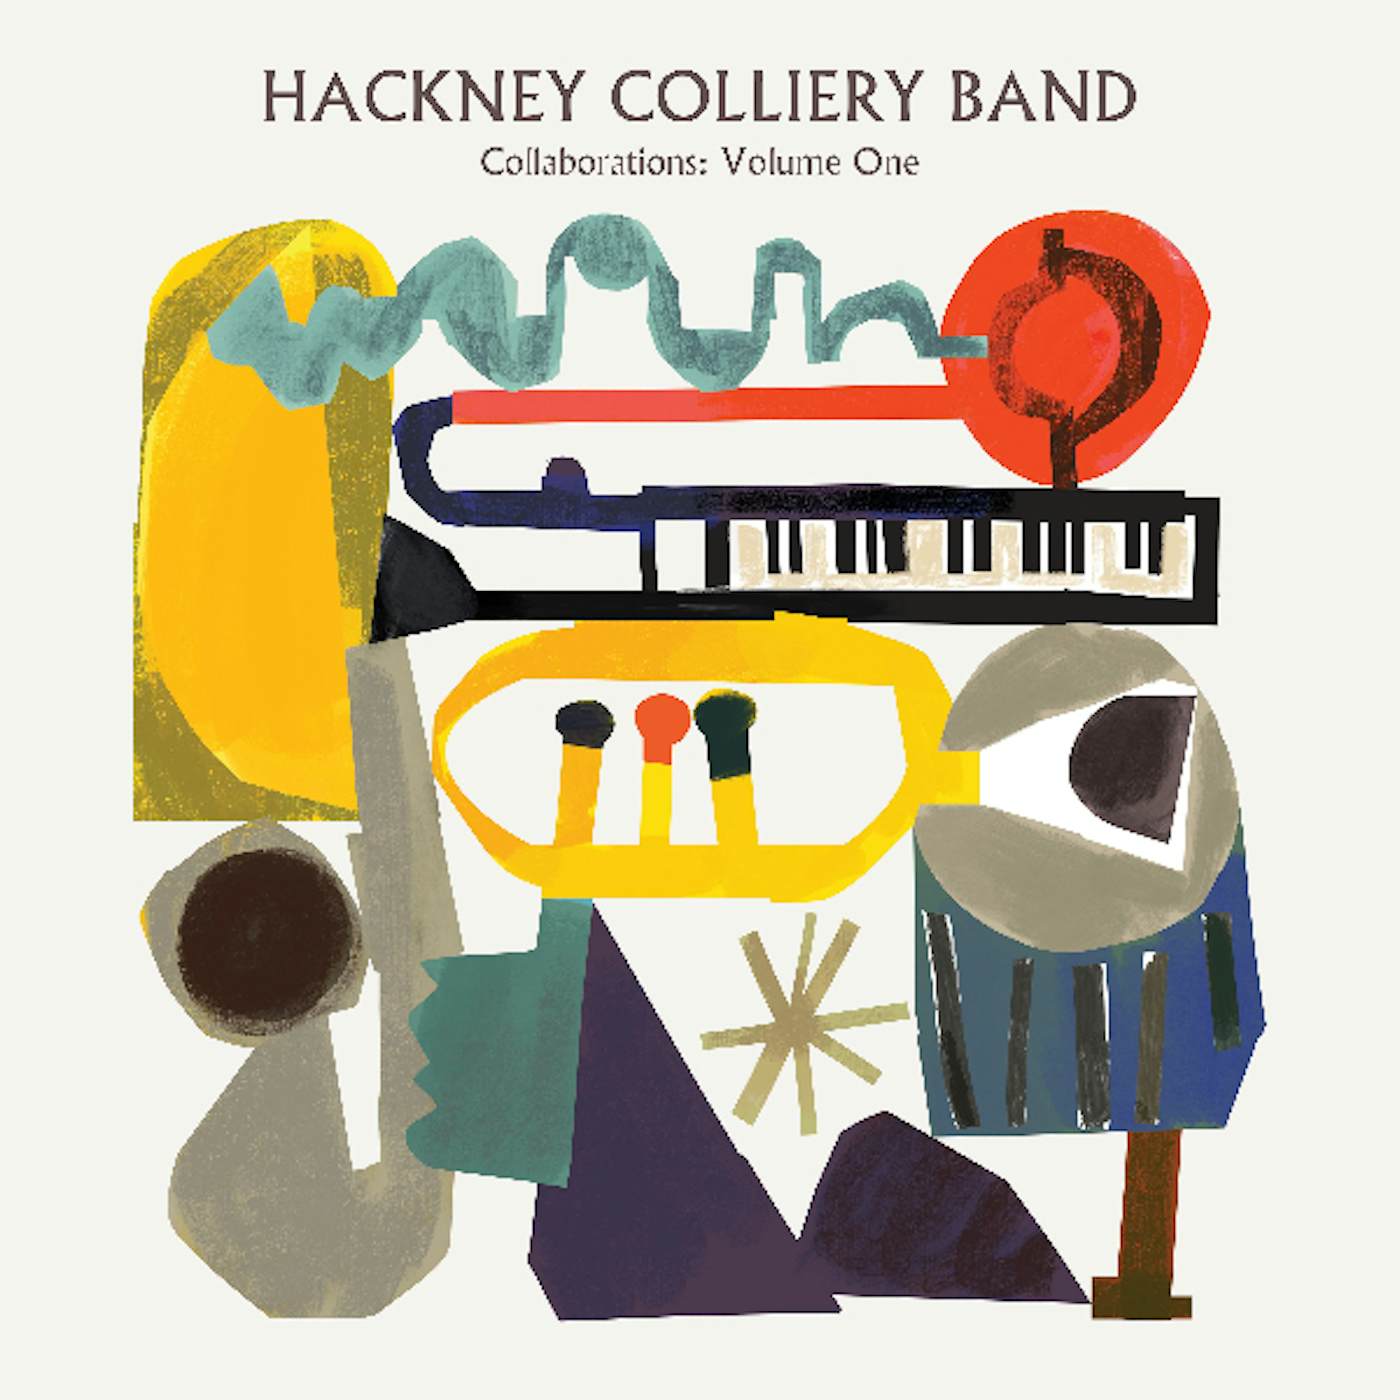 Hackney Colliery Band Collaborations: Volume One Vinyl Record